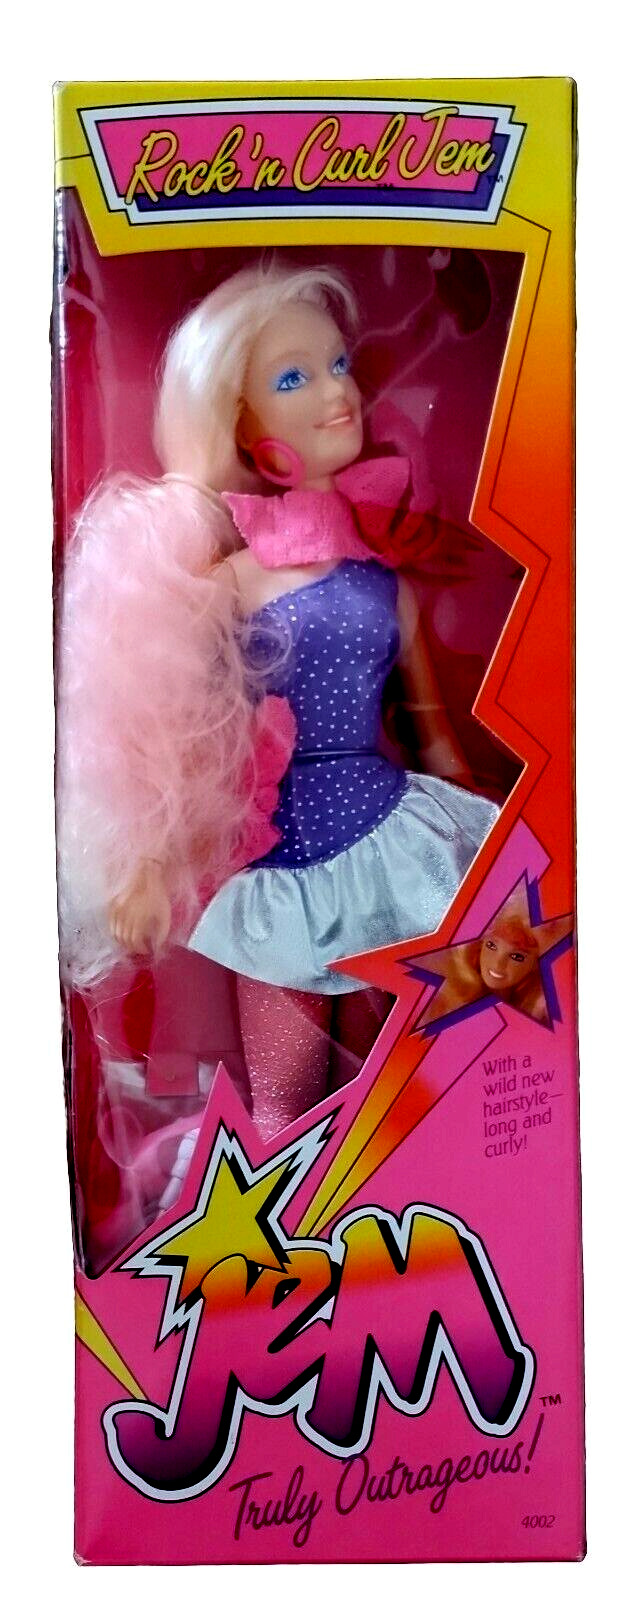 1986 NRFB Hasbro Jem and the Holograms Rock \'n Curl Doll #4002 Collector\'s Item